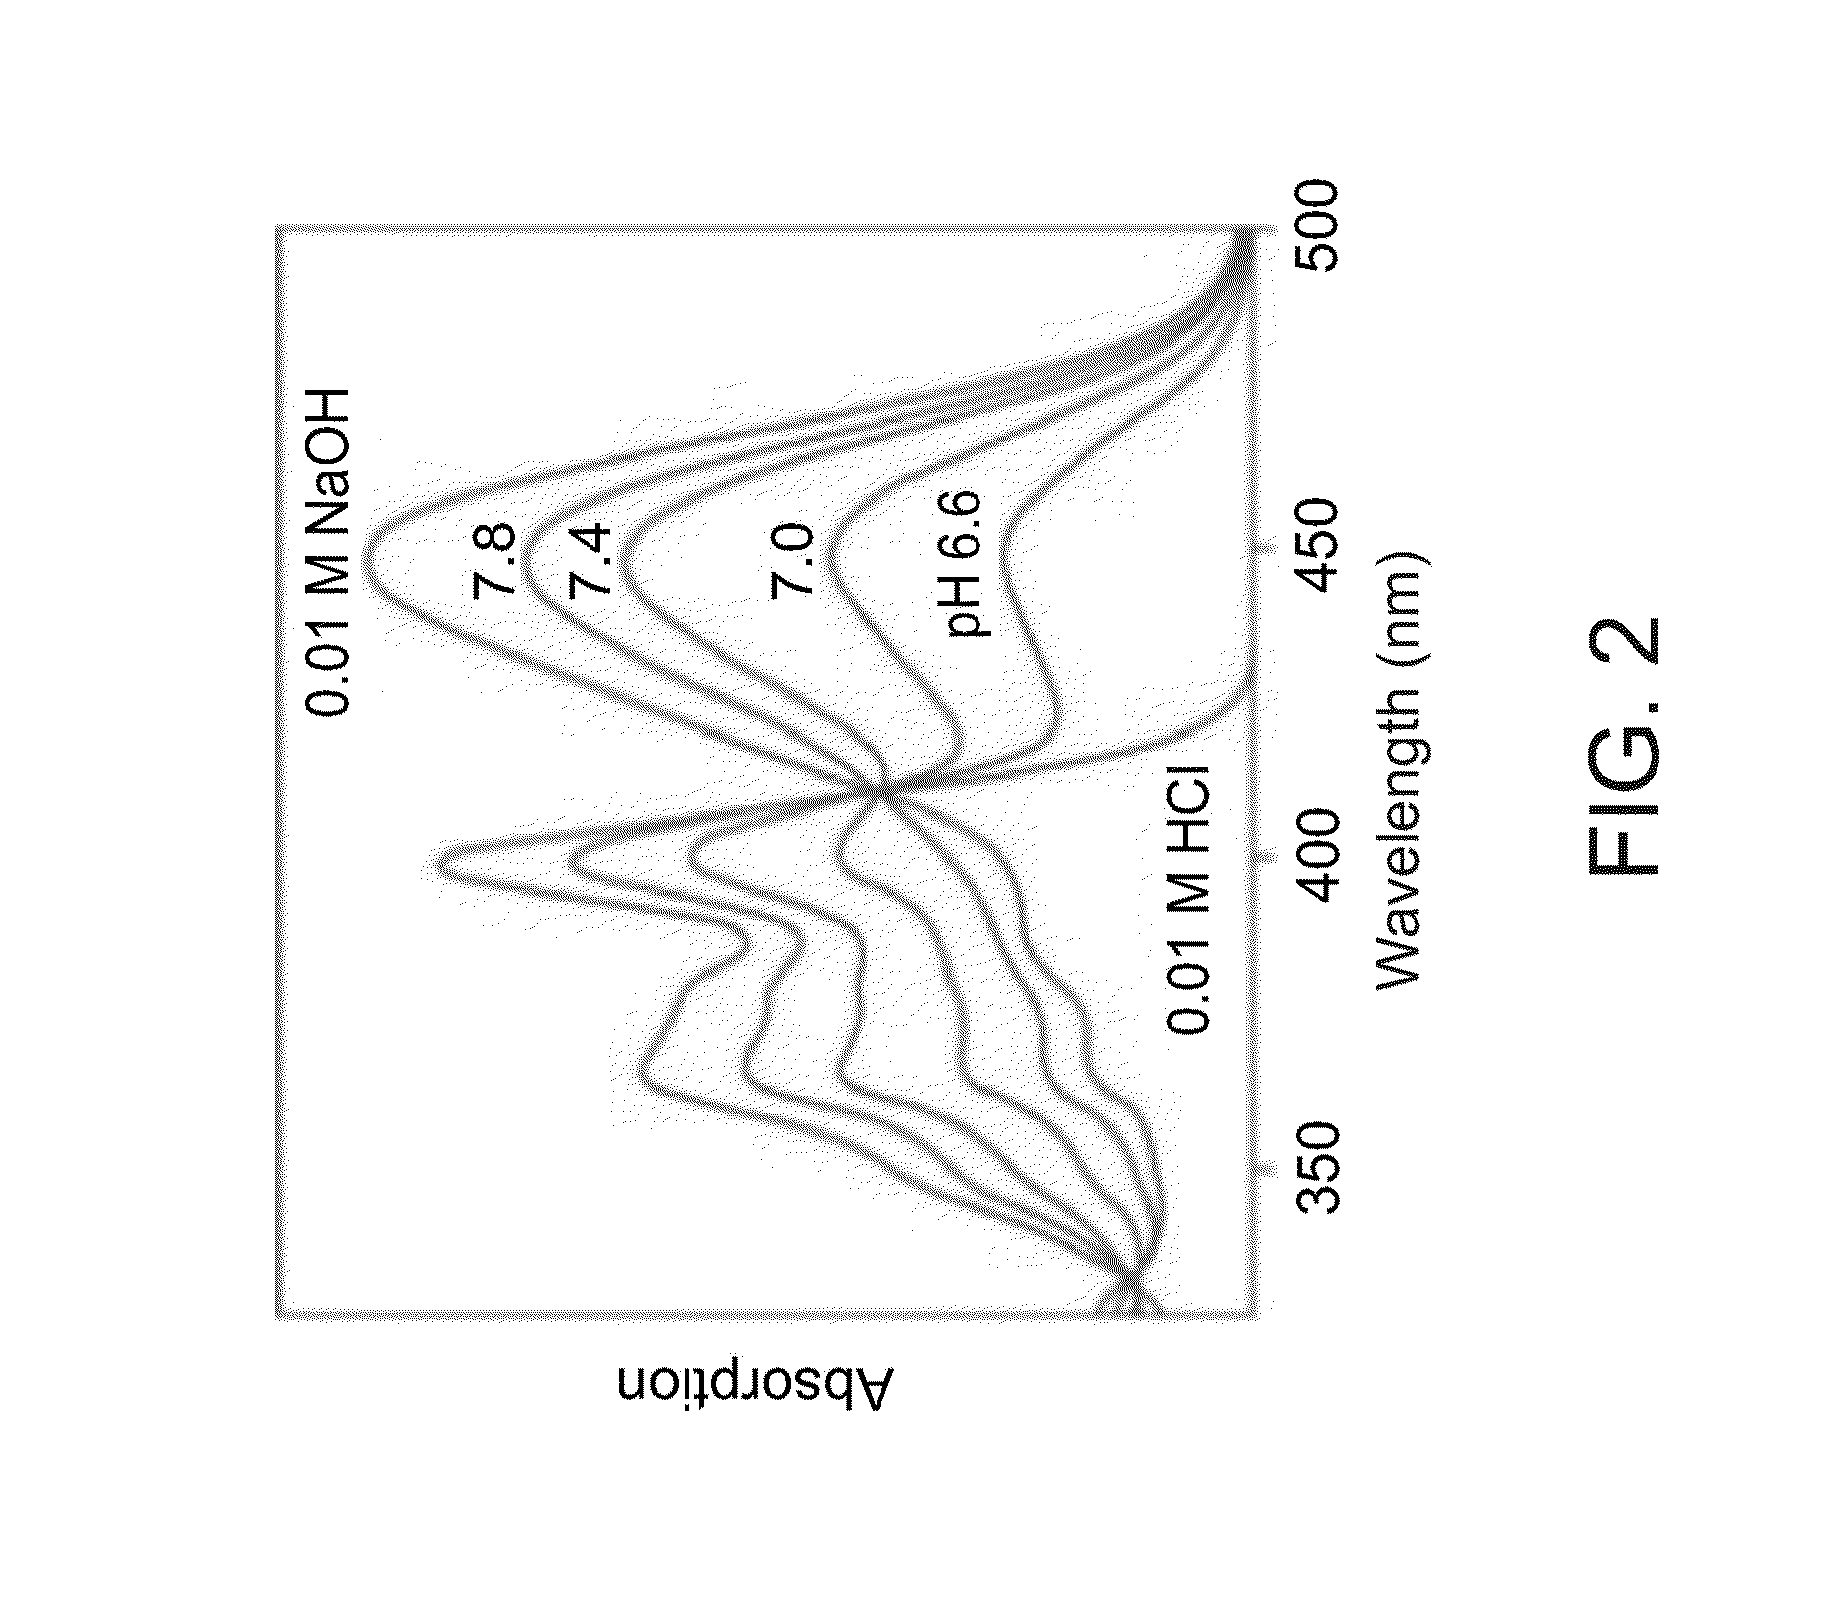 Methods of monitoring and analyzing metabolic activity profiles diagnostic and therapeutic uses of same